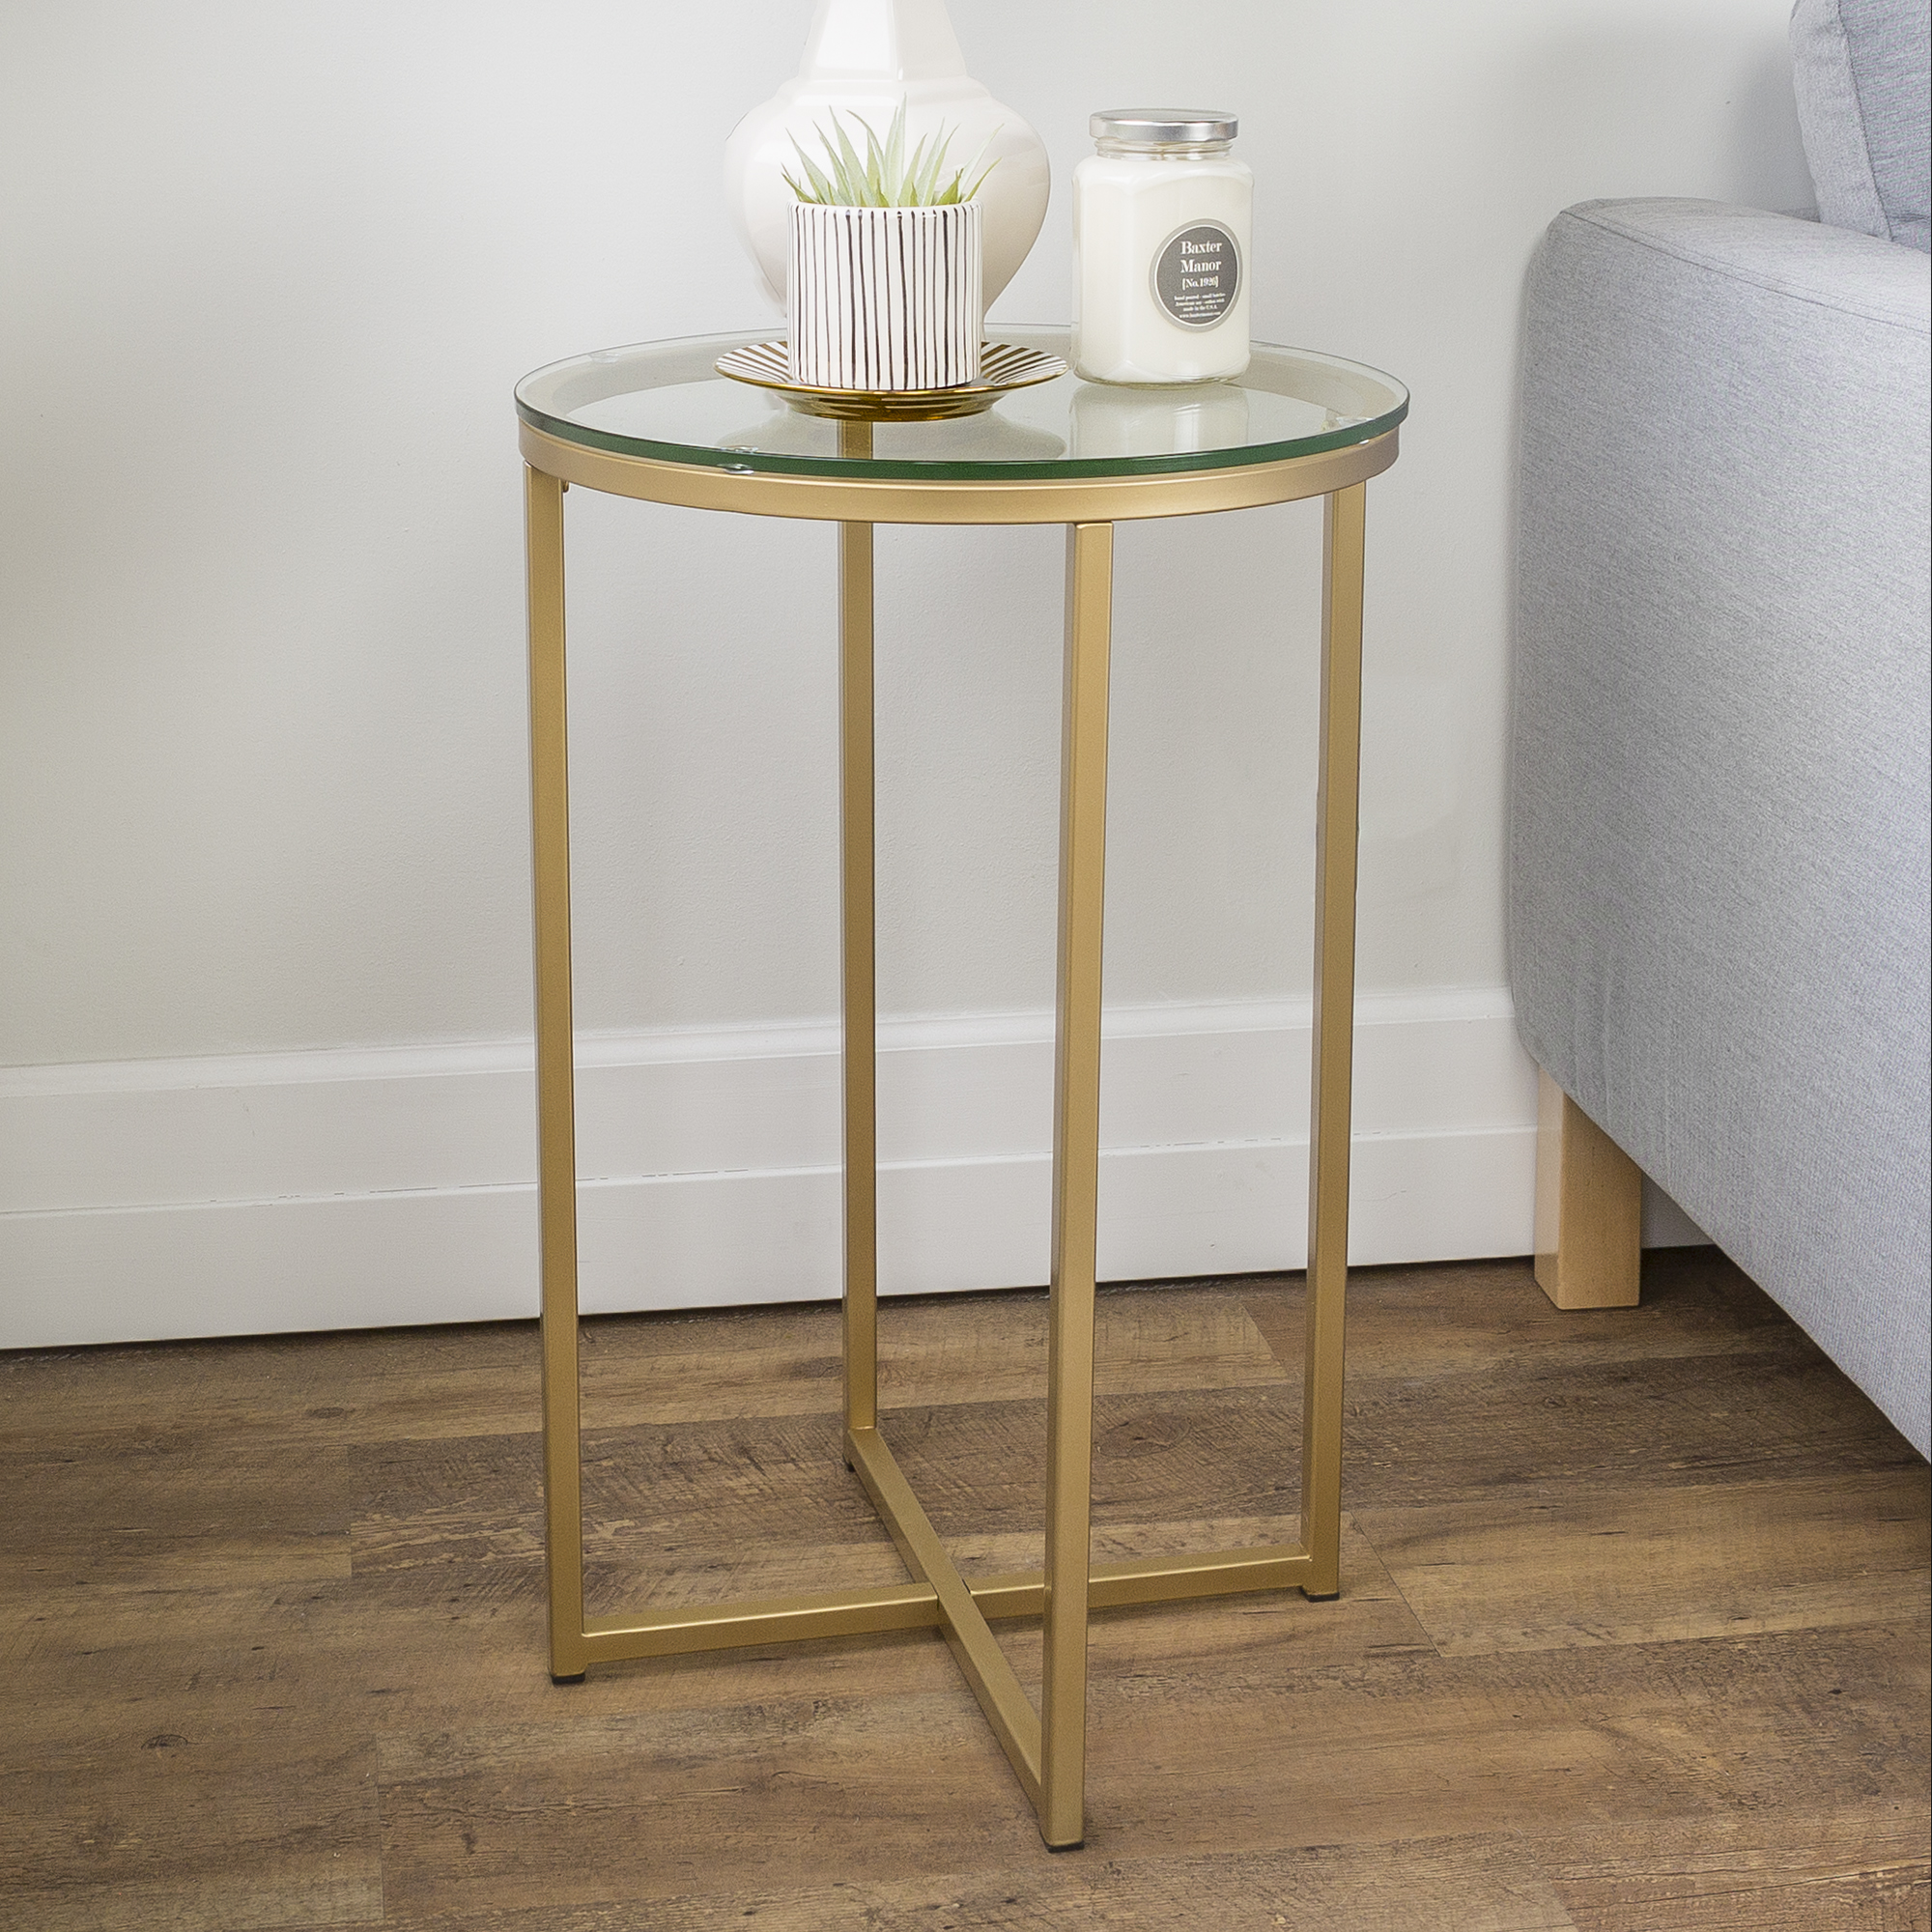 Ember Interiors Modern Glam Round End Table, Glass/Gold - image 1 of 8